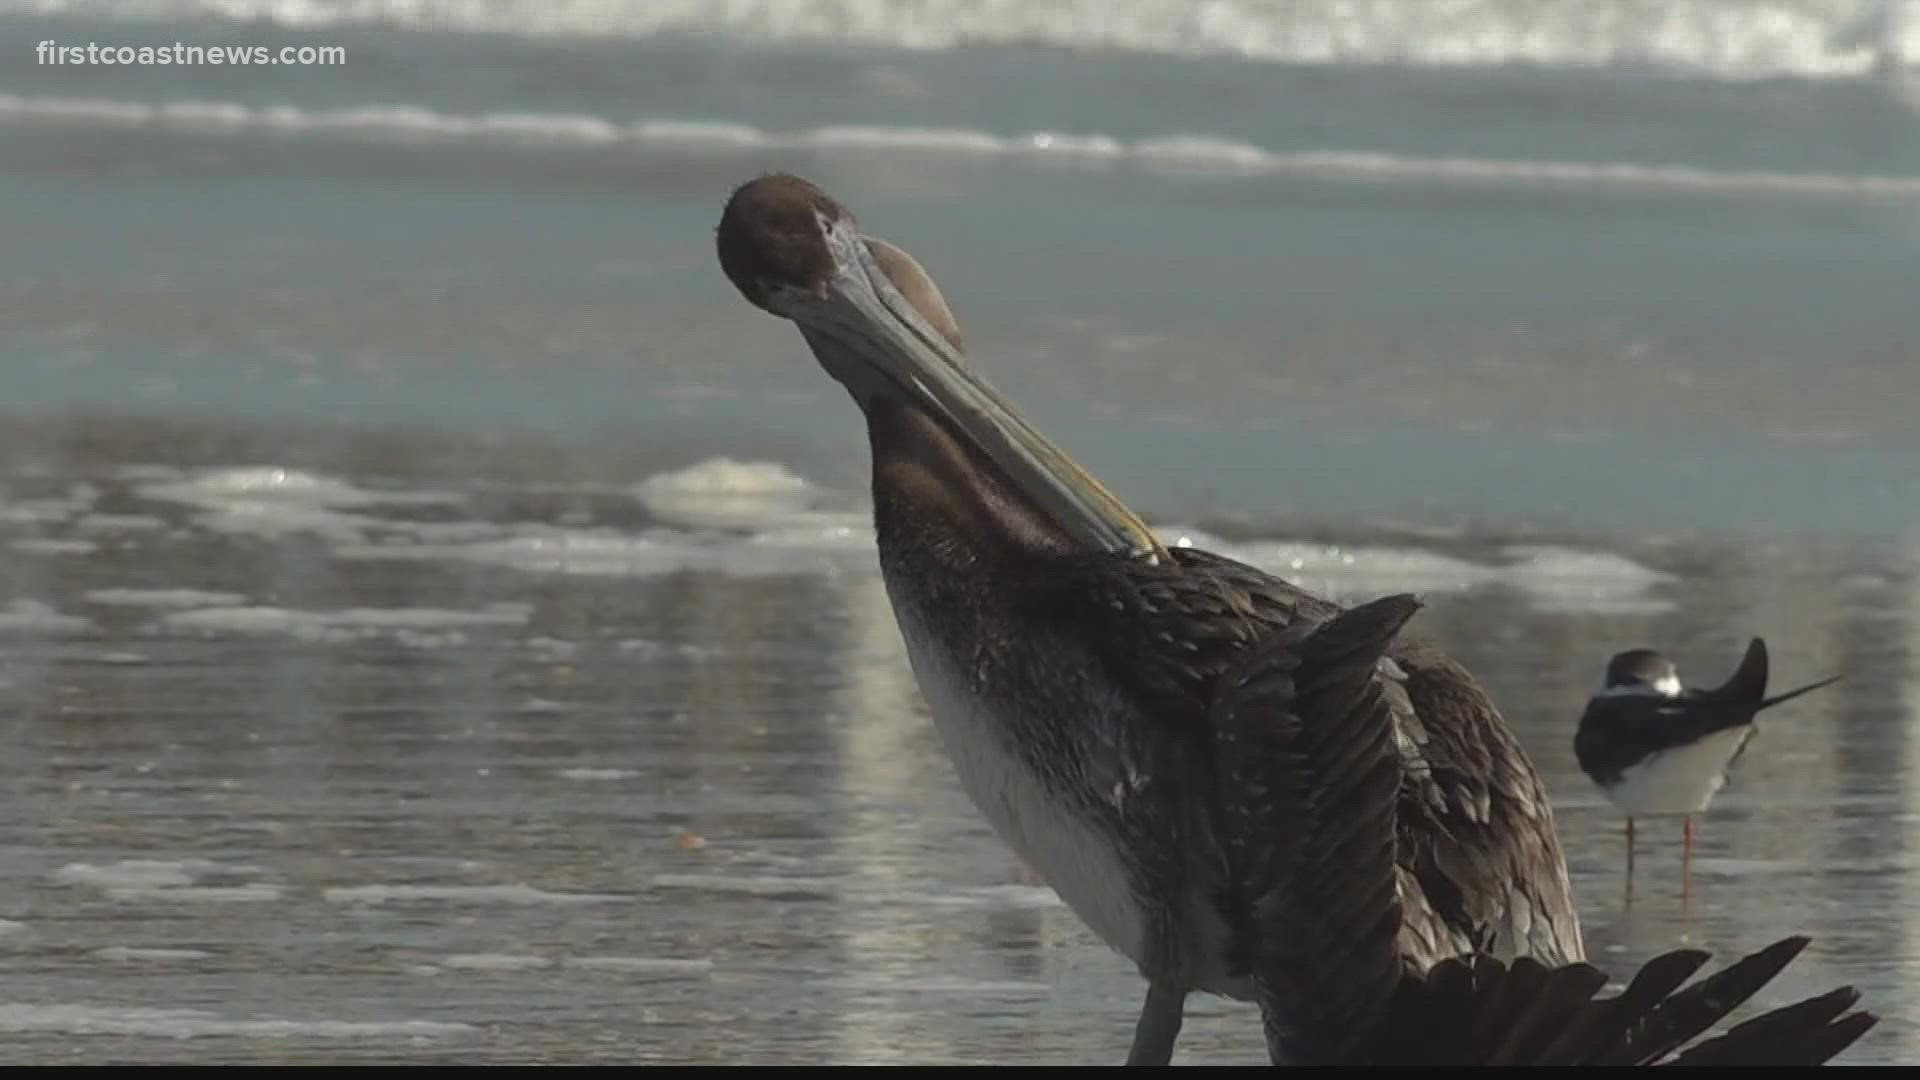 Animal control eventually came to the scene Wednesday afternoon to take the pelican to a bird rescue facility.